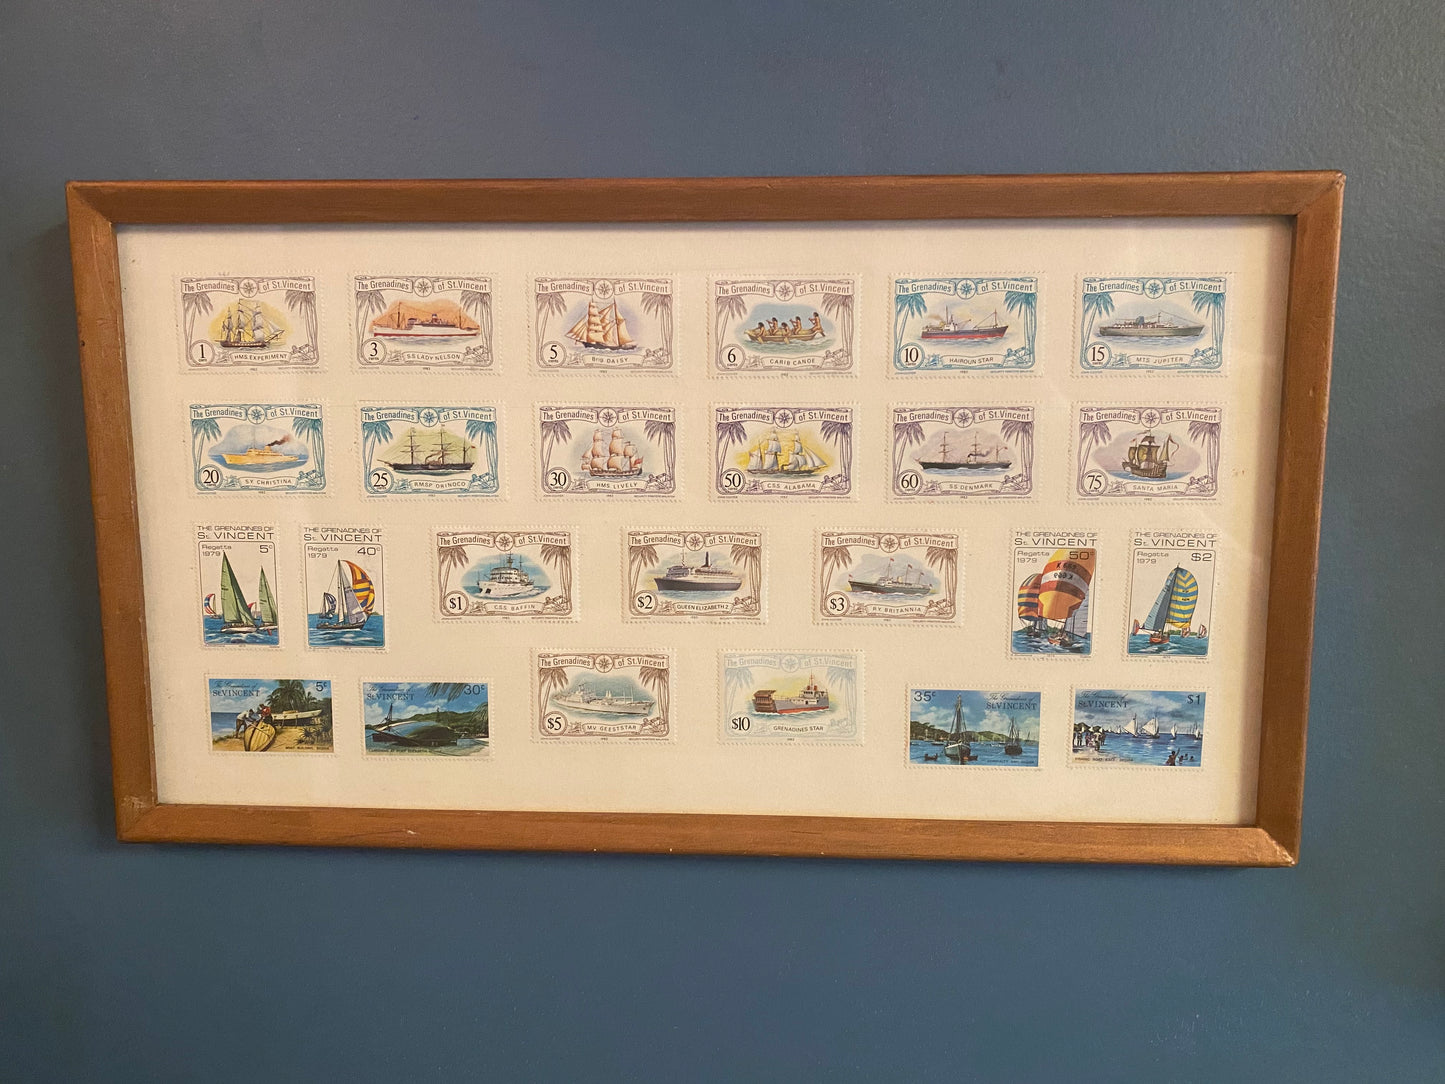 The Grenadines of St. Vincent Uncirculated Stamp Collection Framed